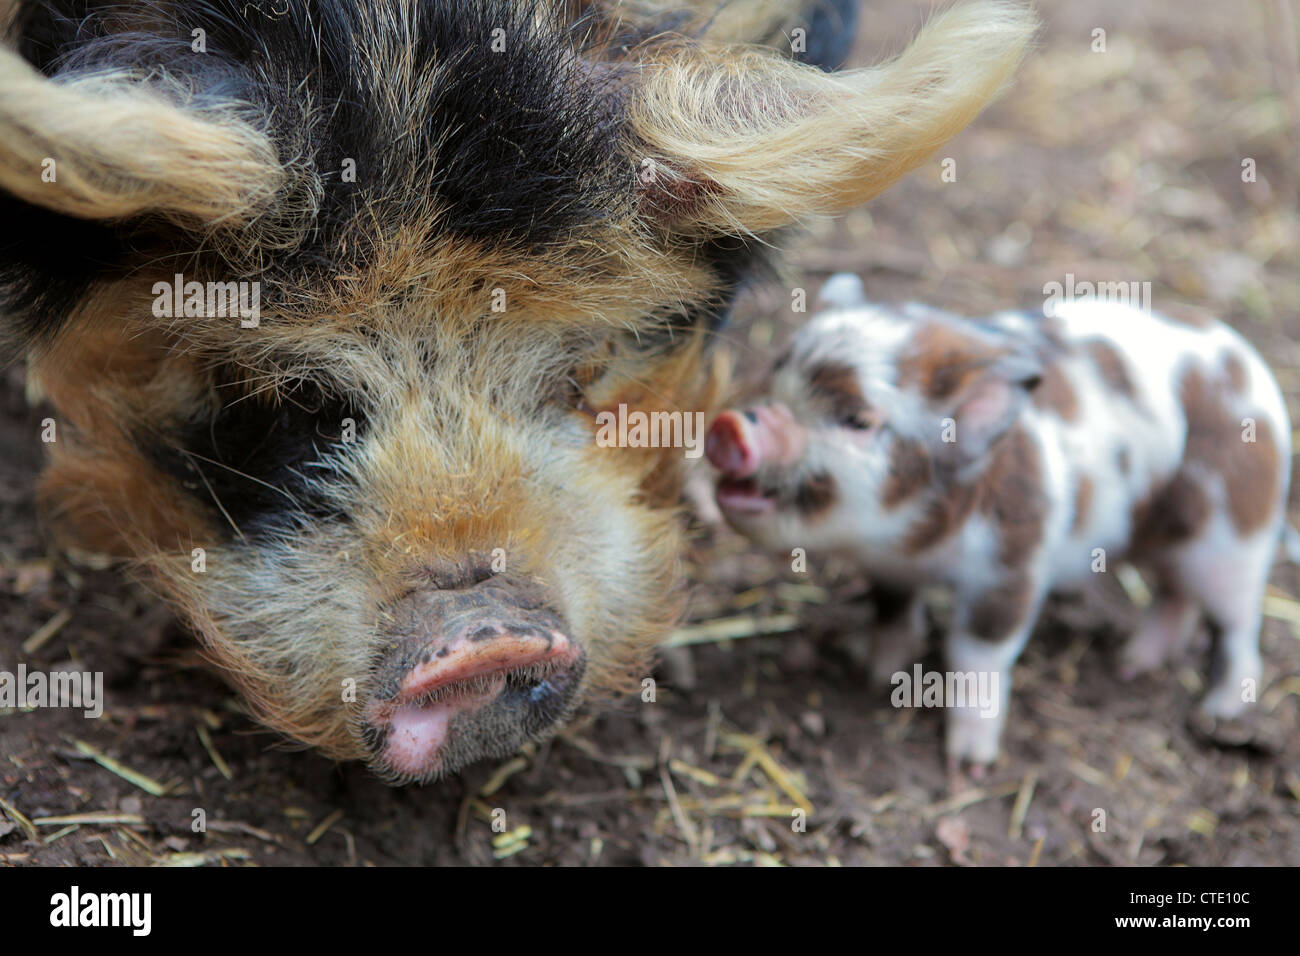 A rare breed Kune Kune pig and her piglet Stock Photo